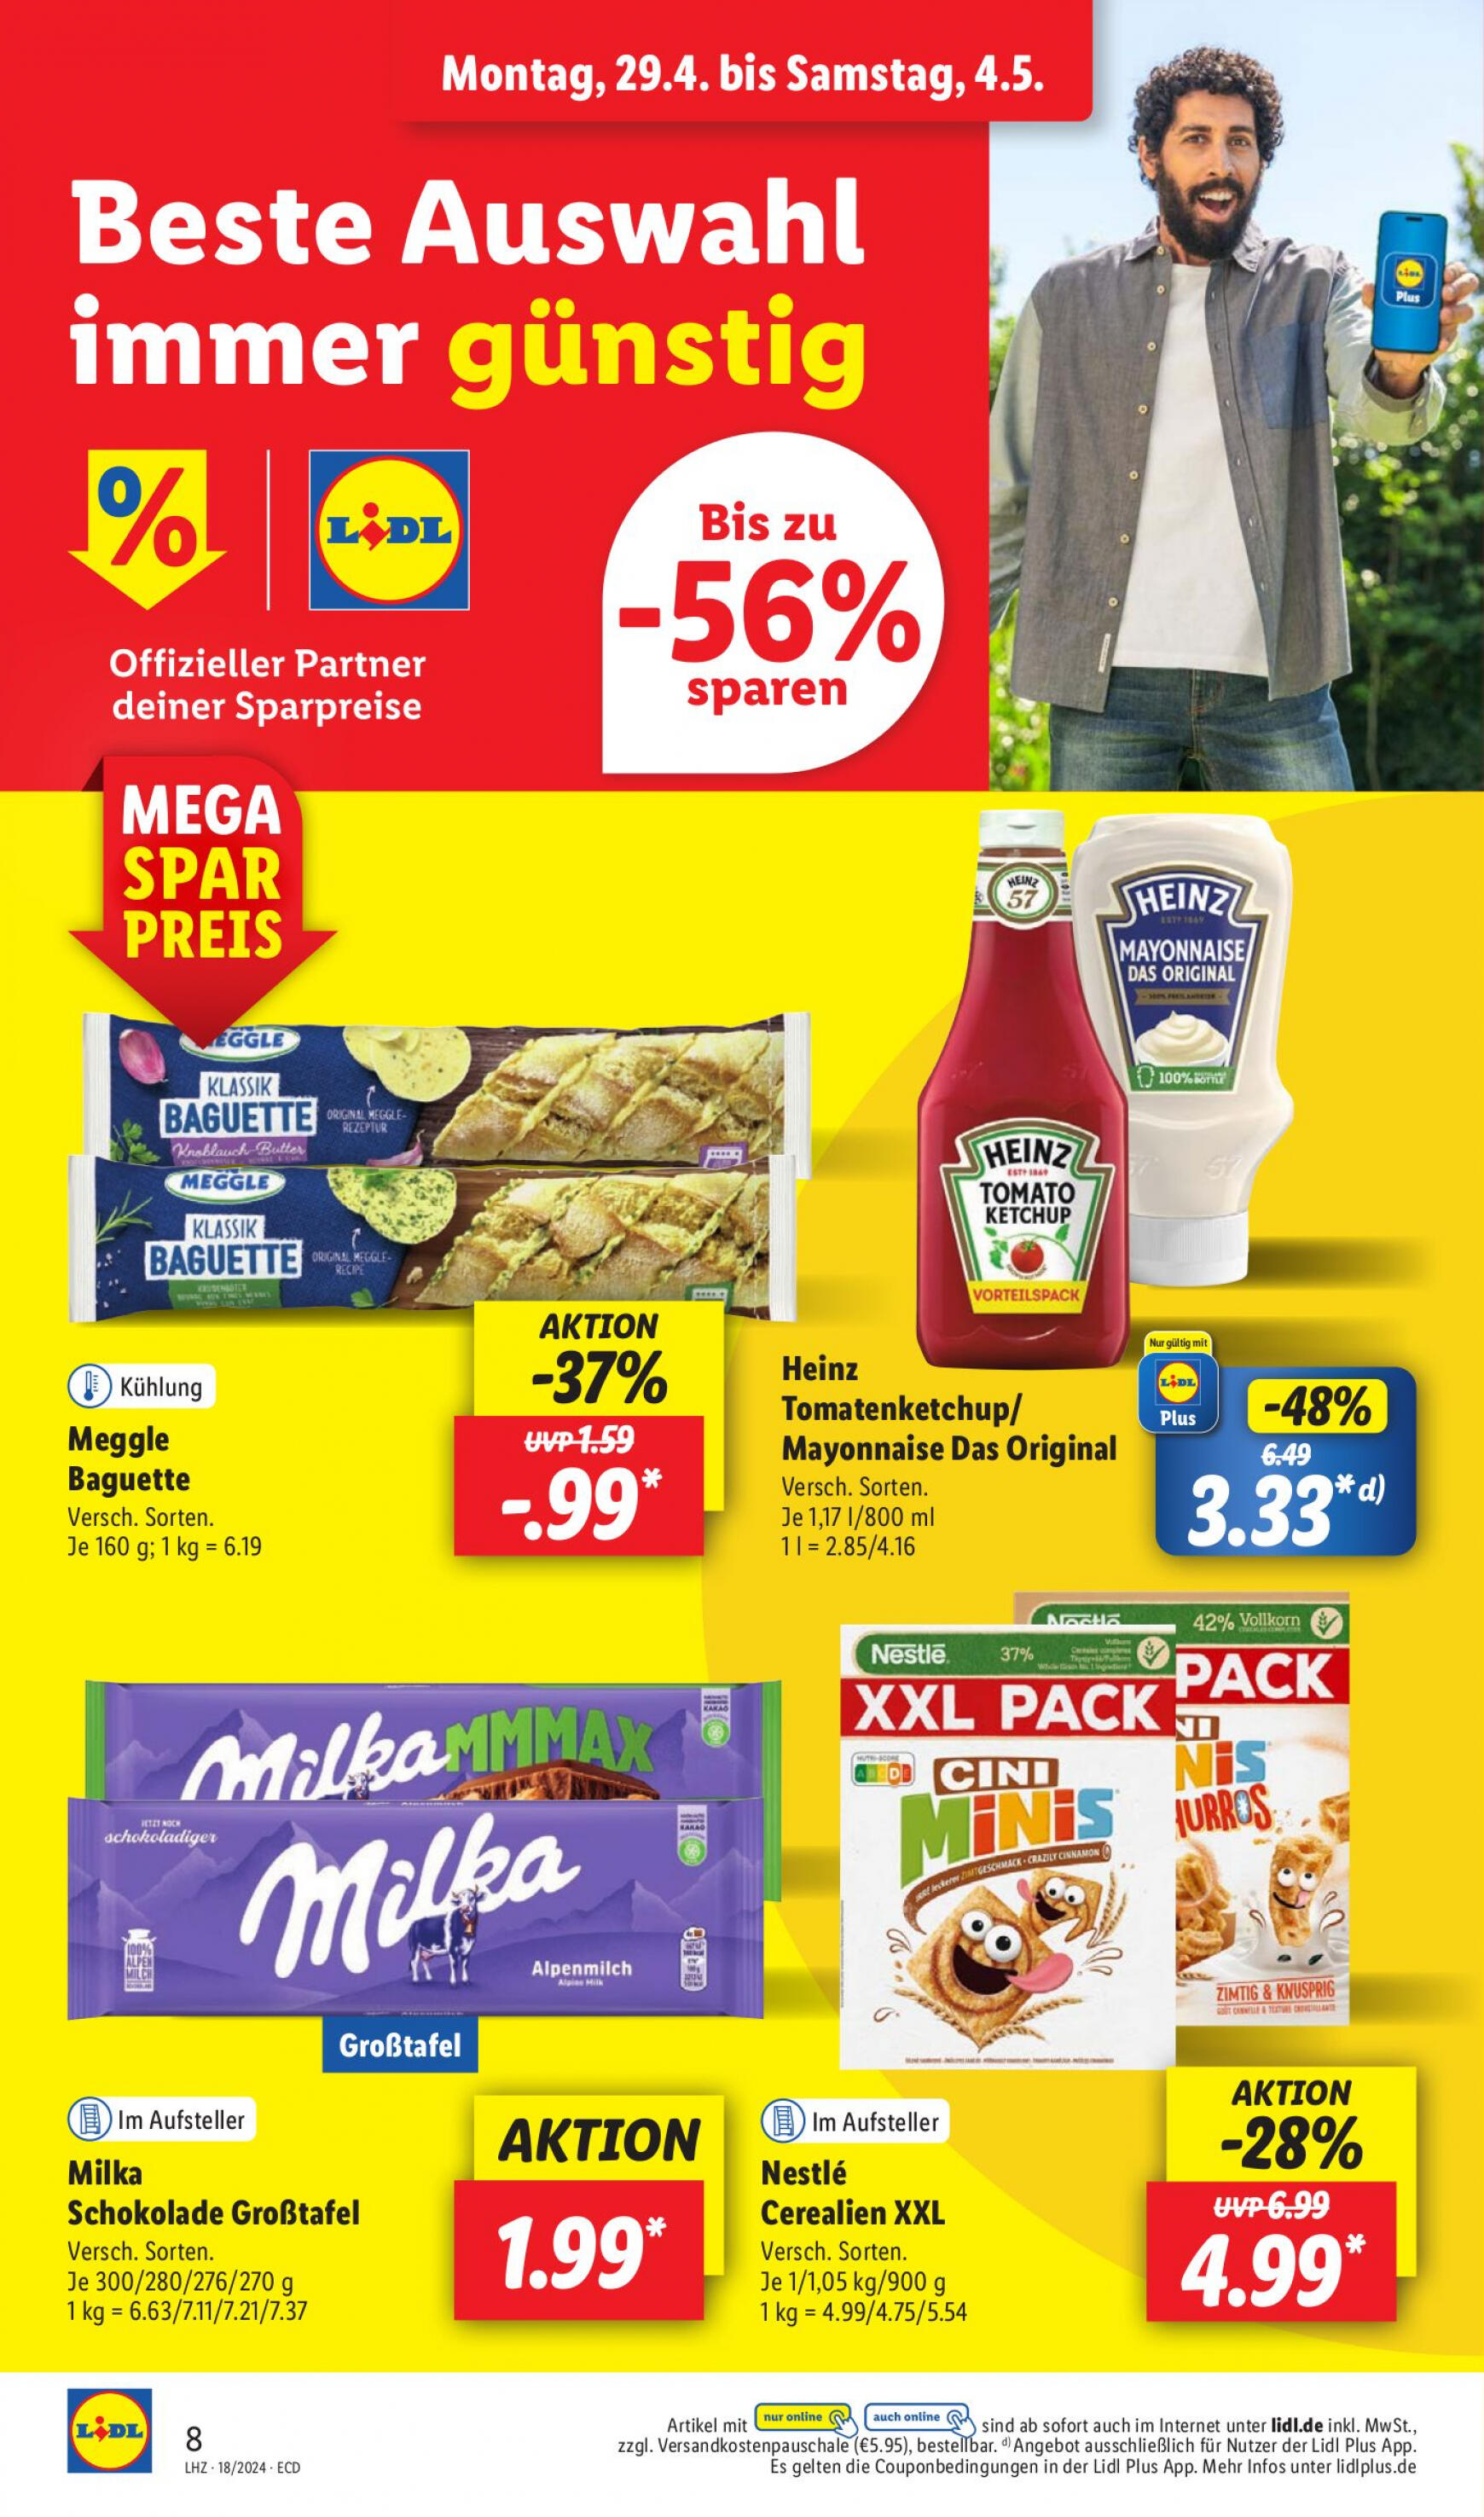 lidl - Flyer Lidl aktuell 29.04. - 04.05. - page: 12